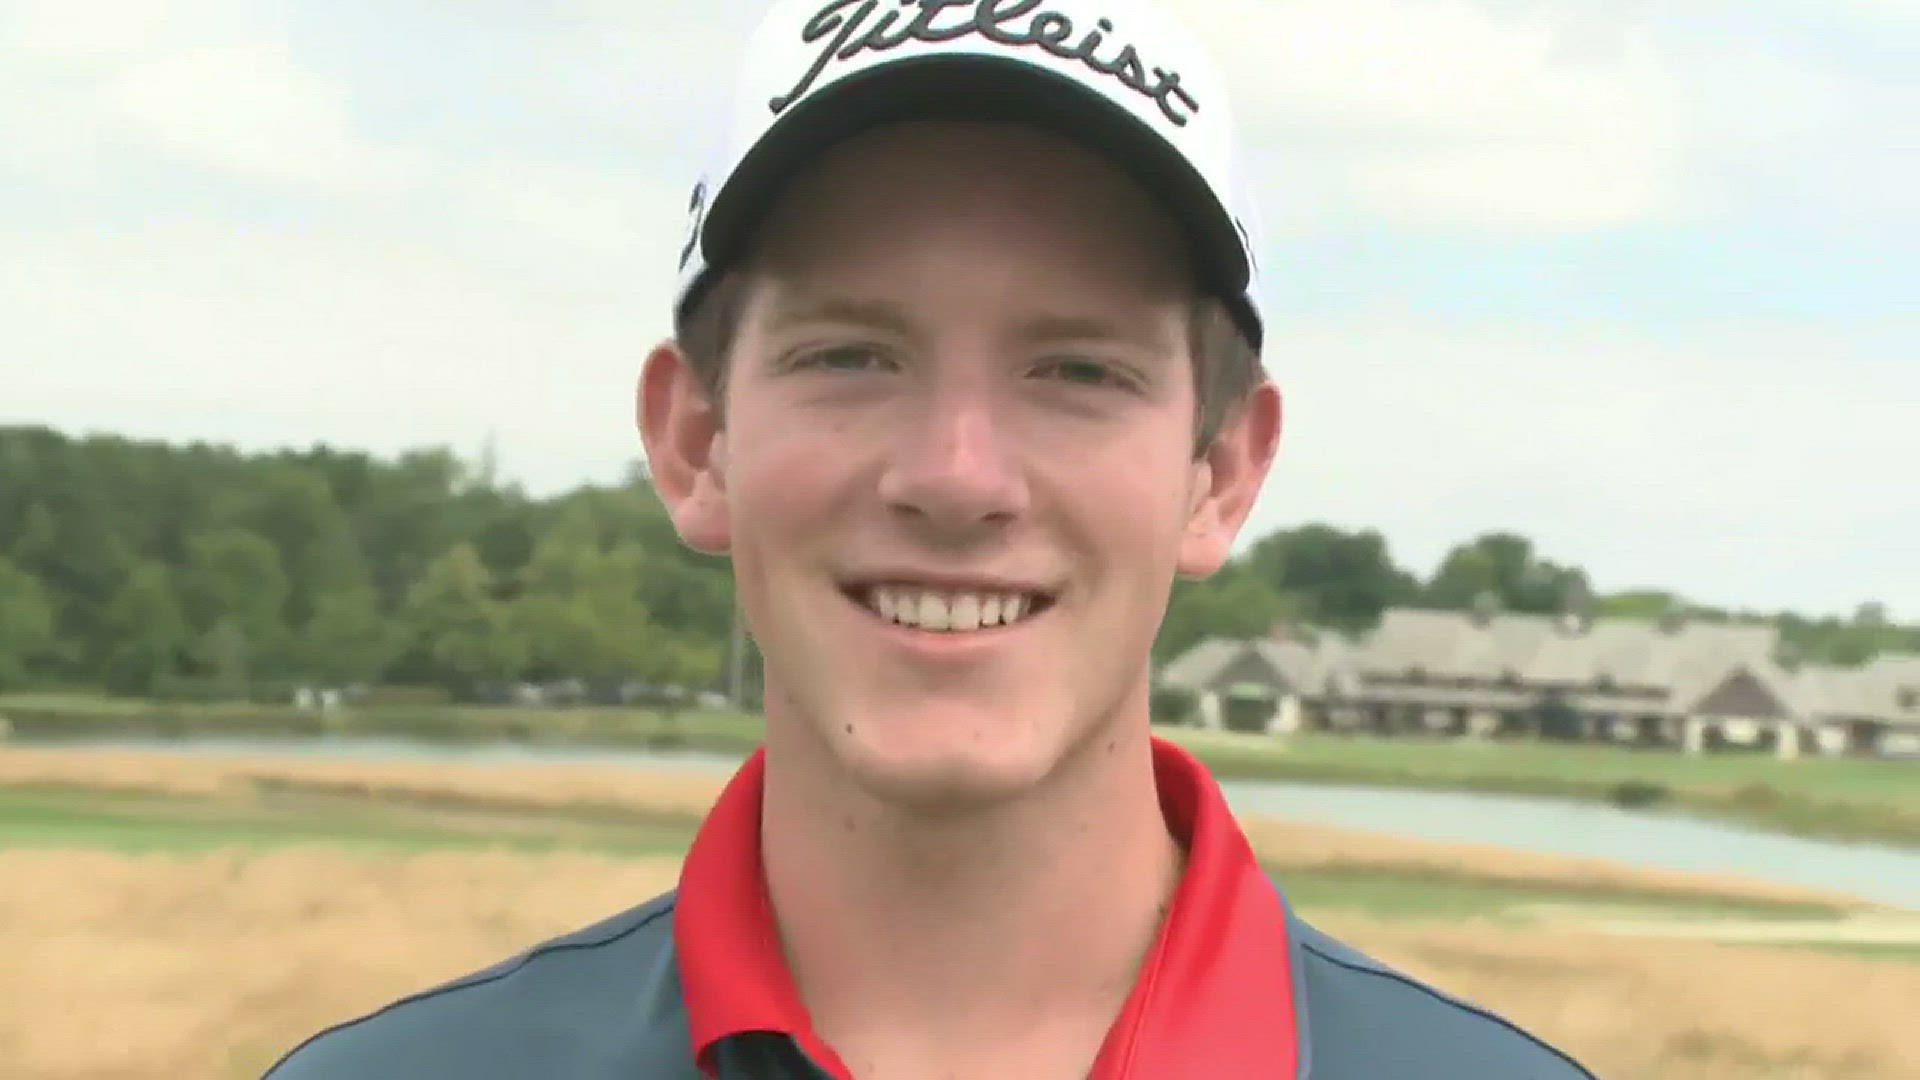 Local amateur golfers David Hanes and Marc Holzhauer will compete in the Porter Cup this week. Channel 2's Jonah Javad joined the two WNYers for nine holes at Crag Burn Golf Club. It went how you would expect.